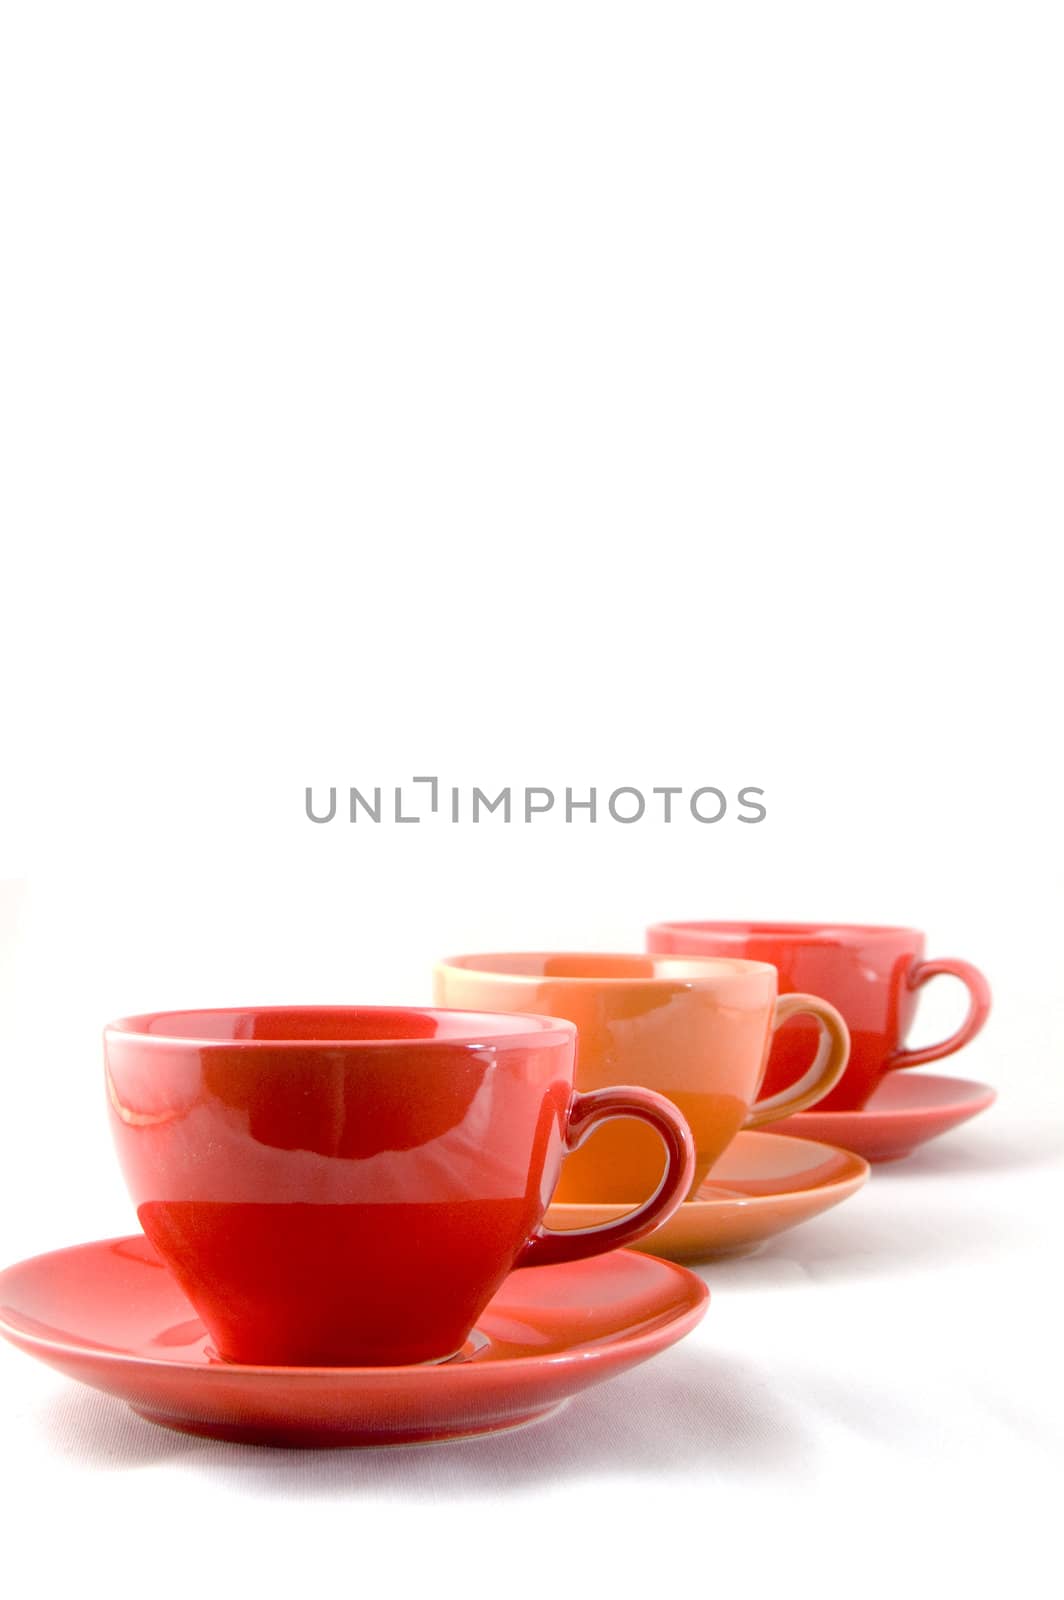 cup and saucer isolated on white background